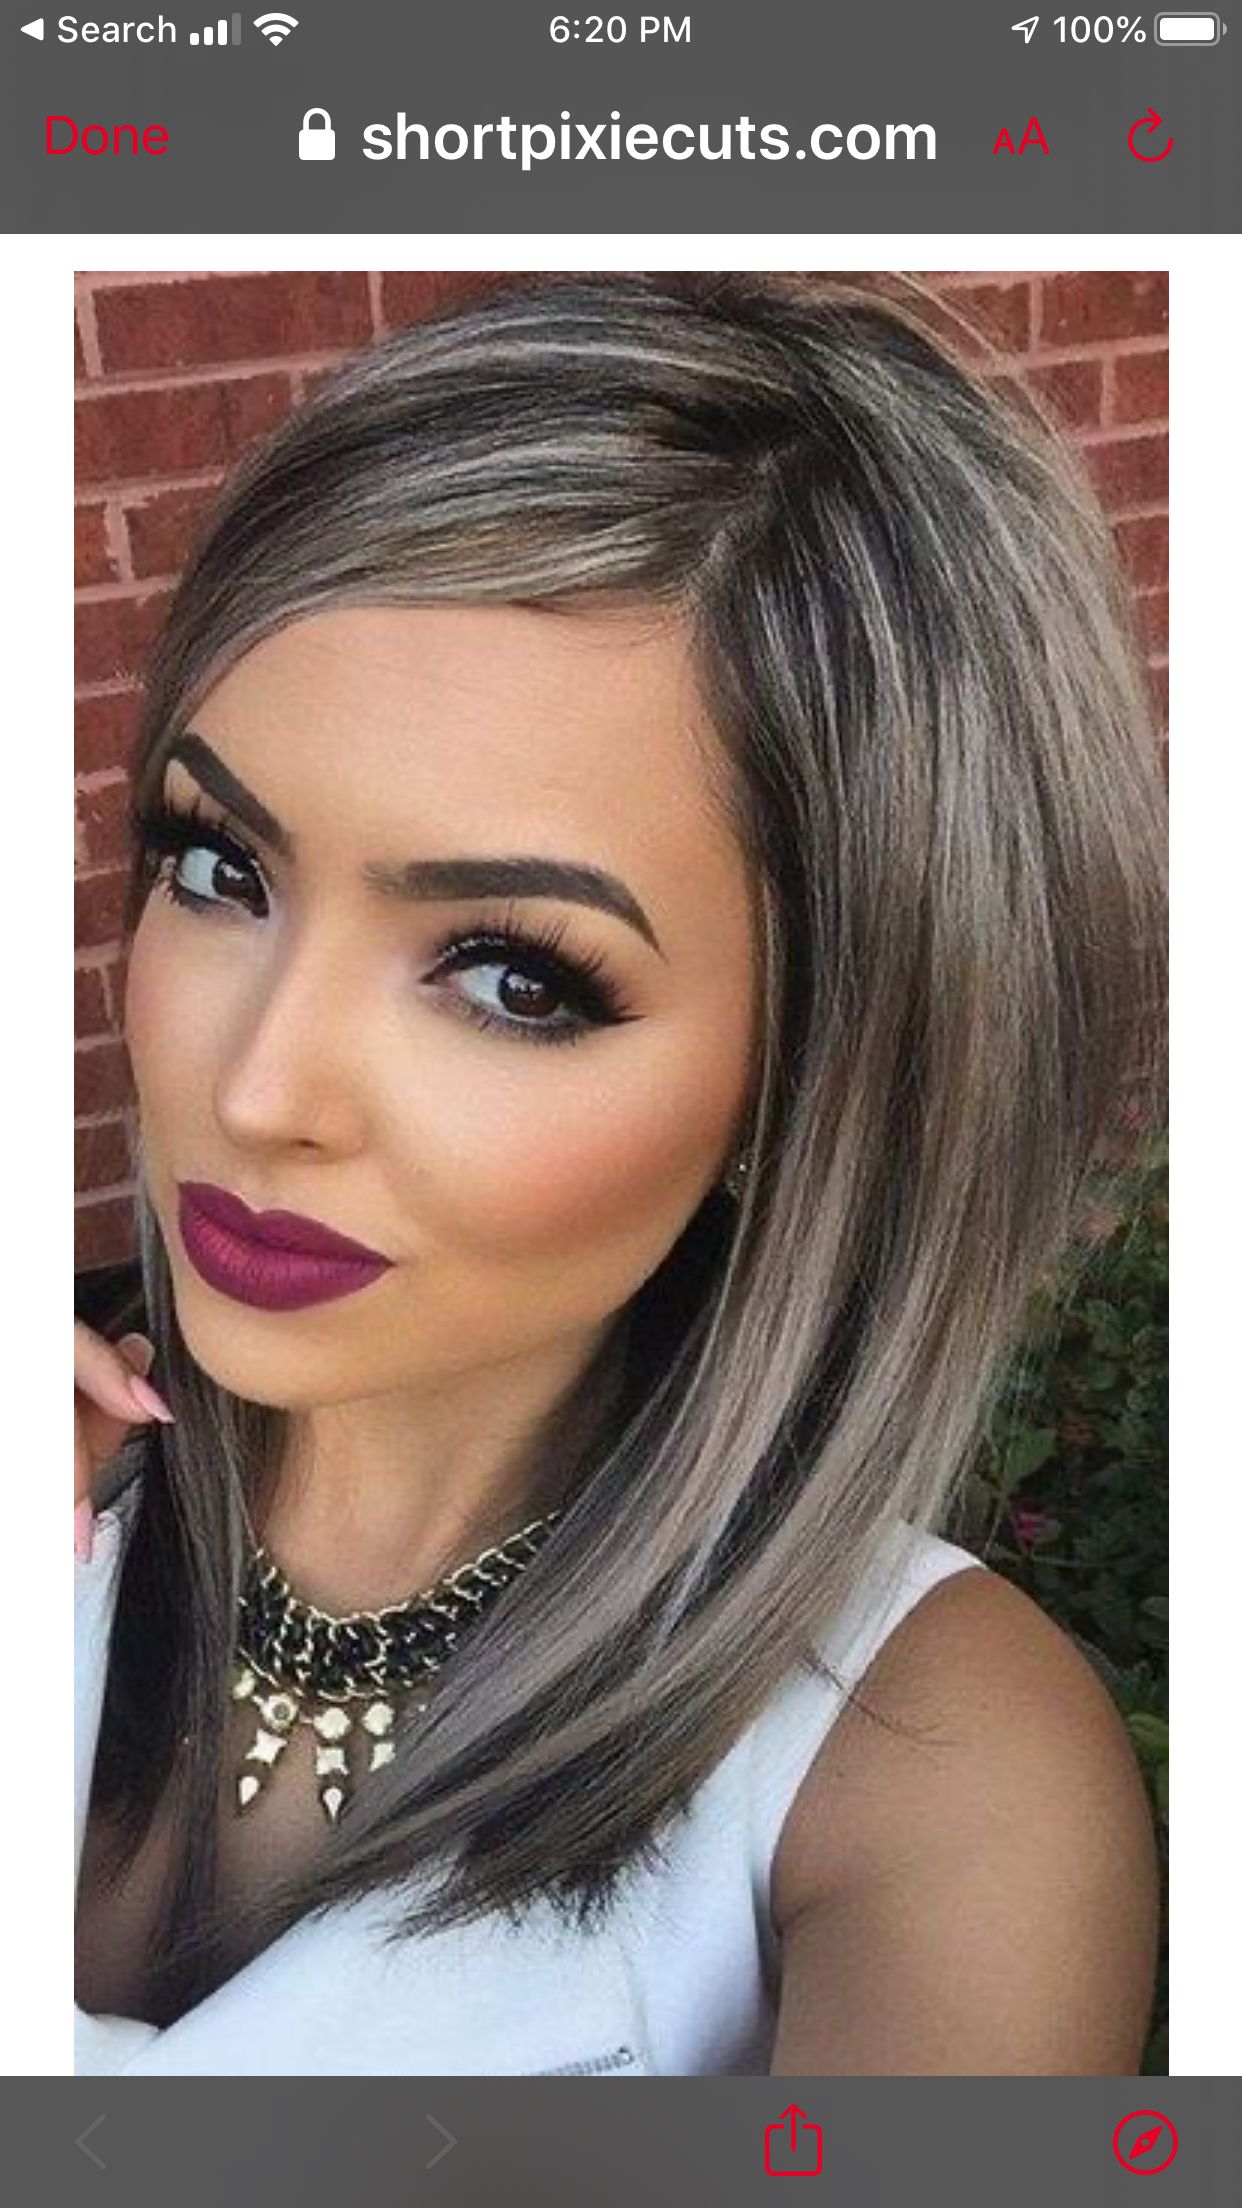 Hair Color Trend for Women 160 40s women hairstyles | face shape | hair care routine hair color trends